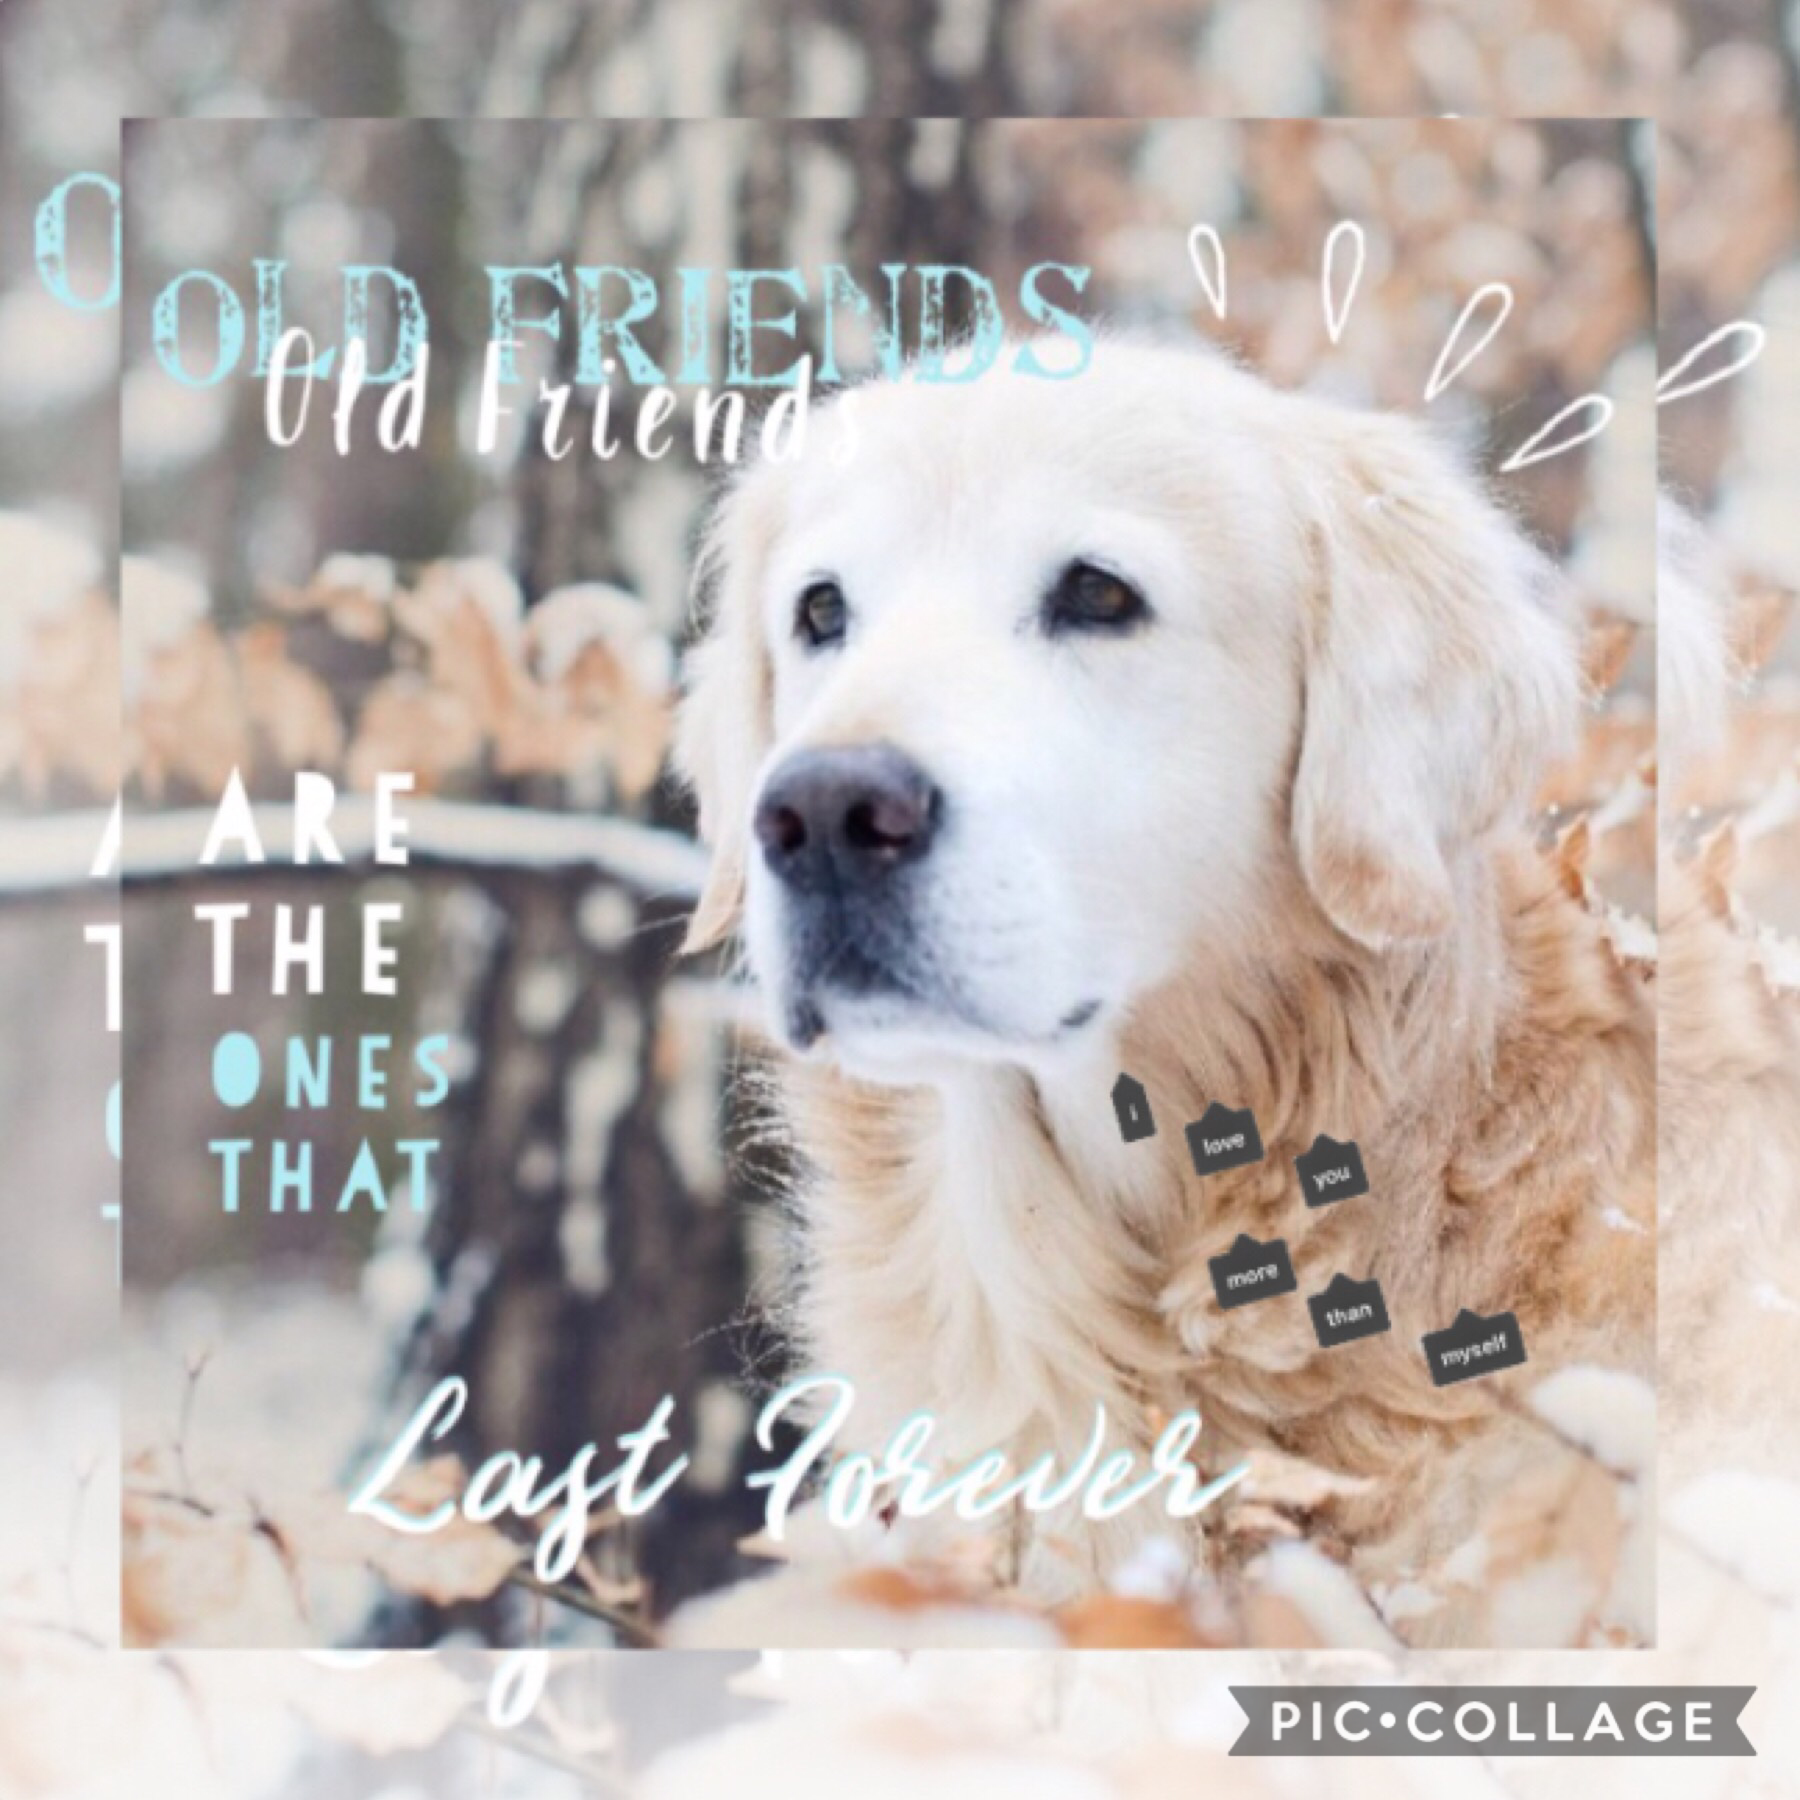 🐕 Tap 🐕 
I think this one has a good quote. What do you guys think? Rate out of ten.